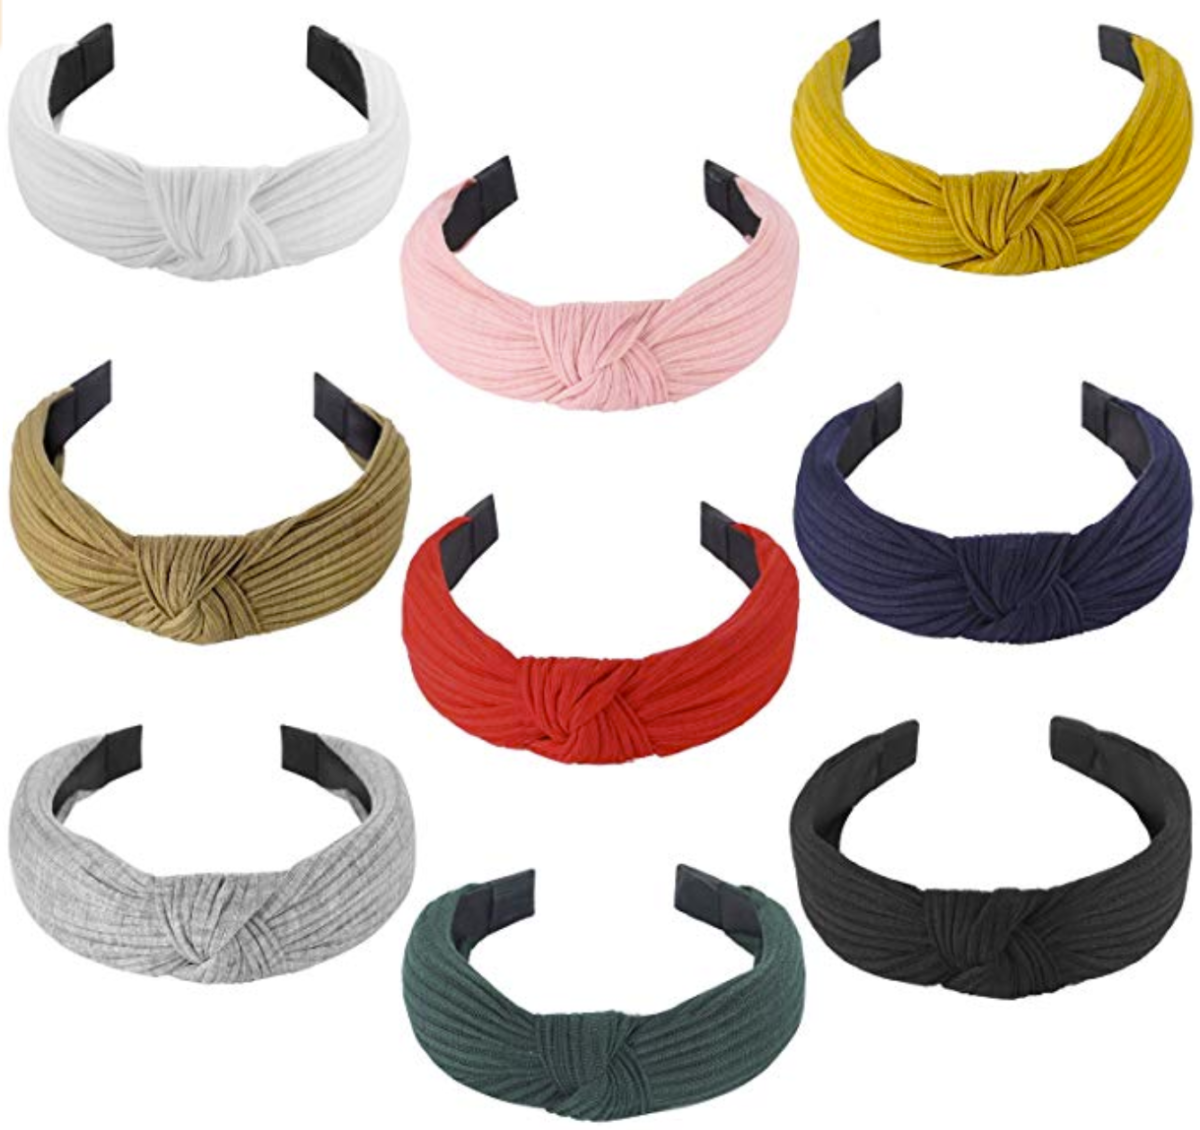 headbands | t | Spring Clothing by popular Houston fashion blog, Haute and Humid: image of various knotted headbands.